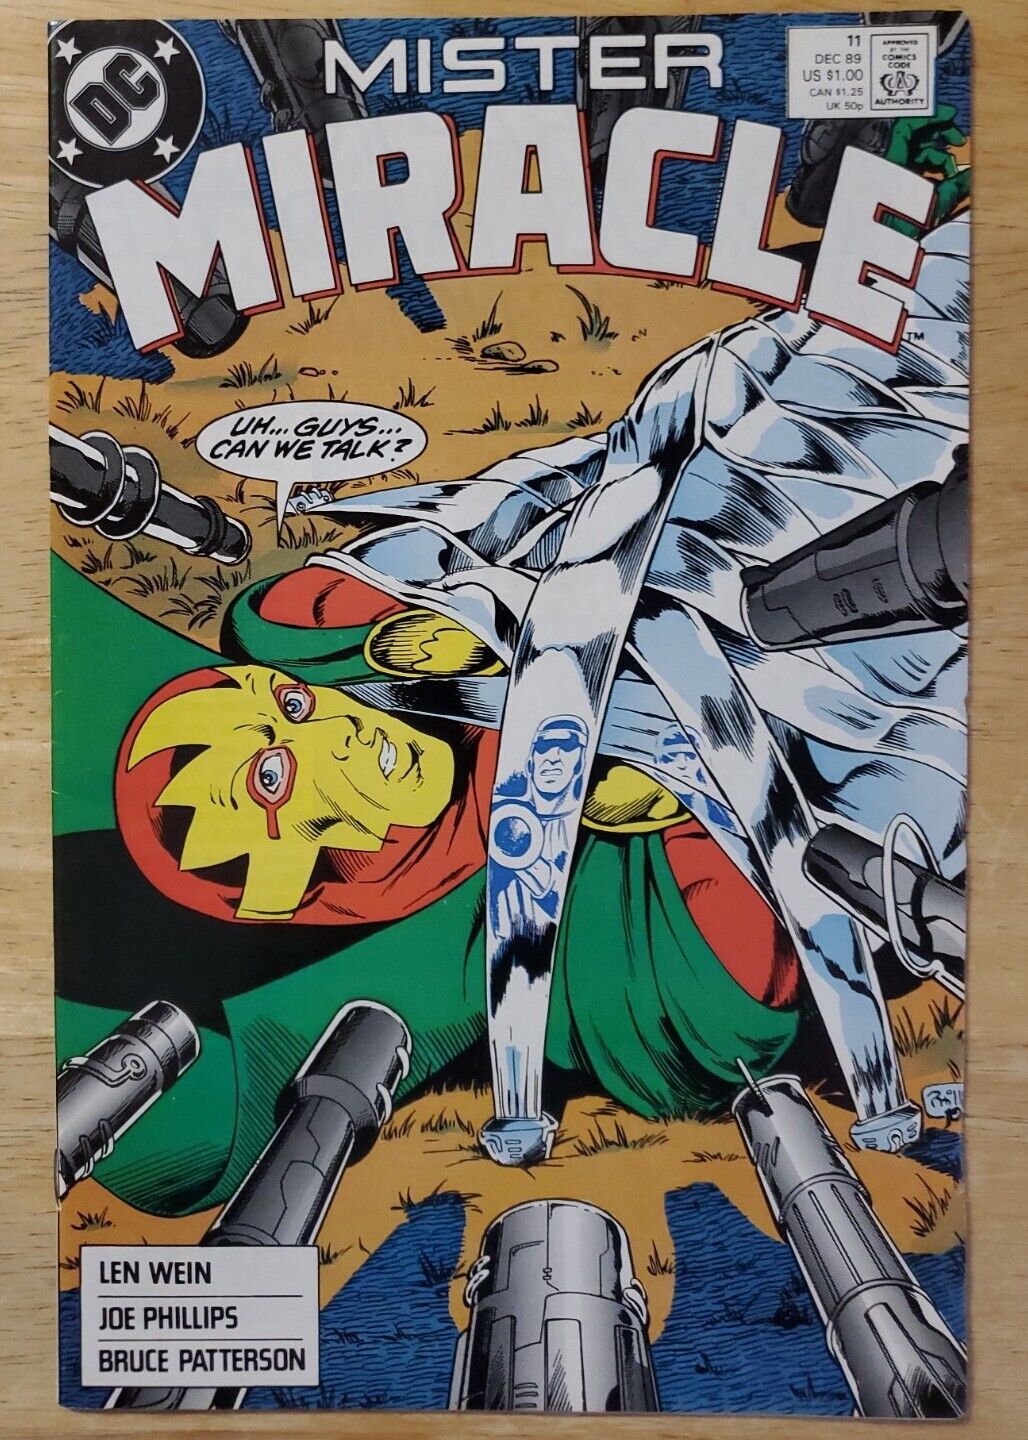 Mister Miracle Issue 11 Vintage DC Comics 1989